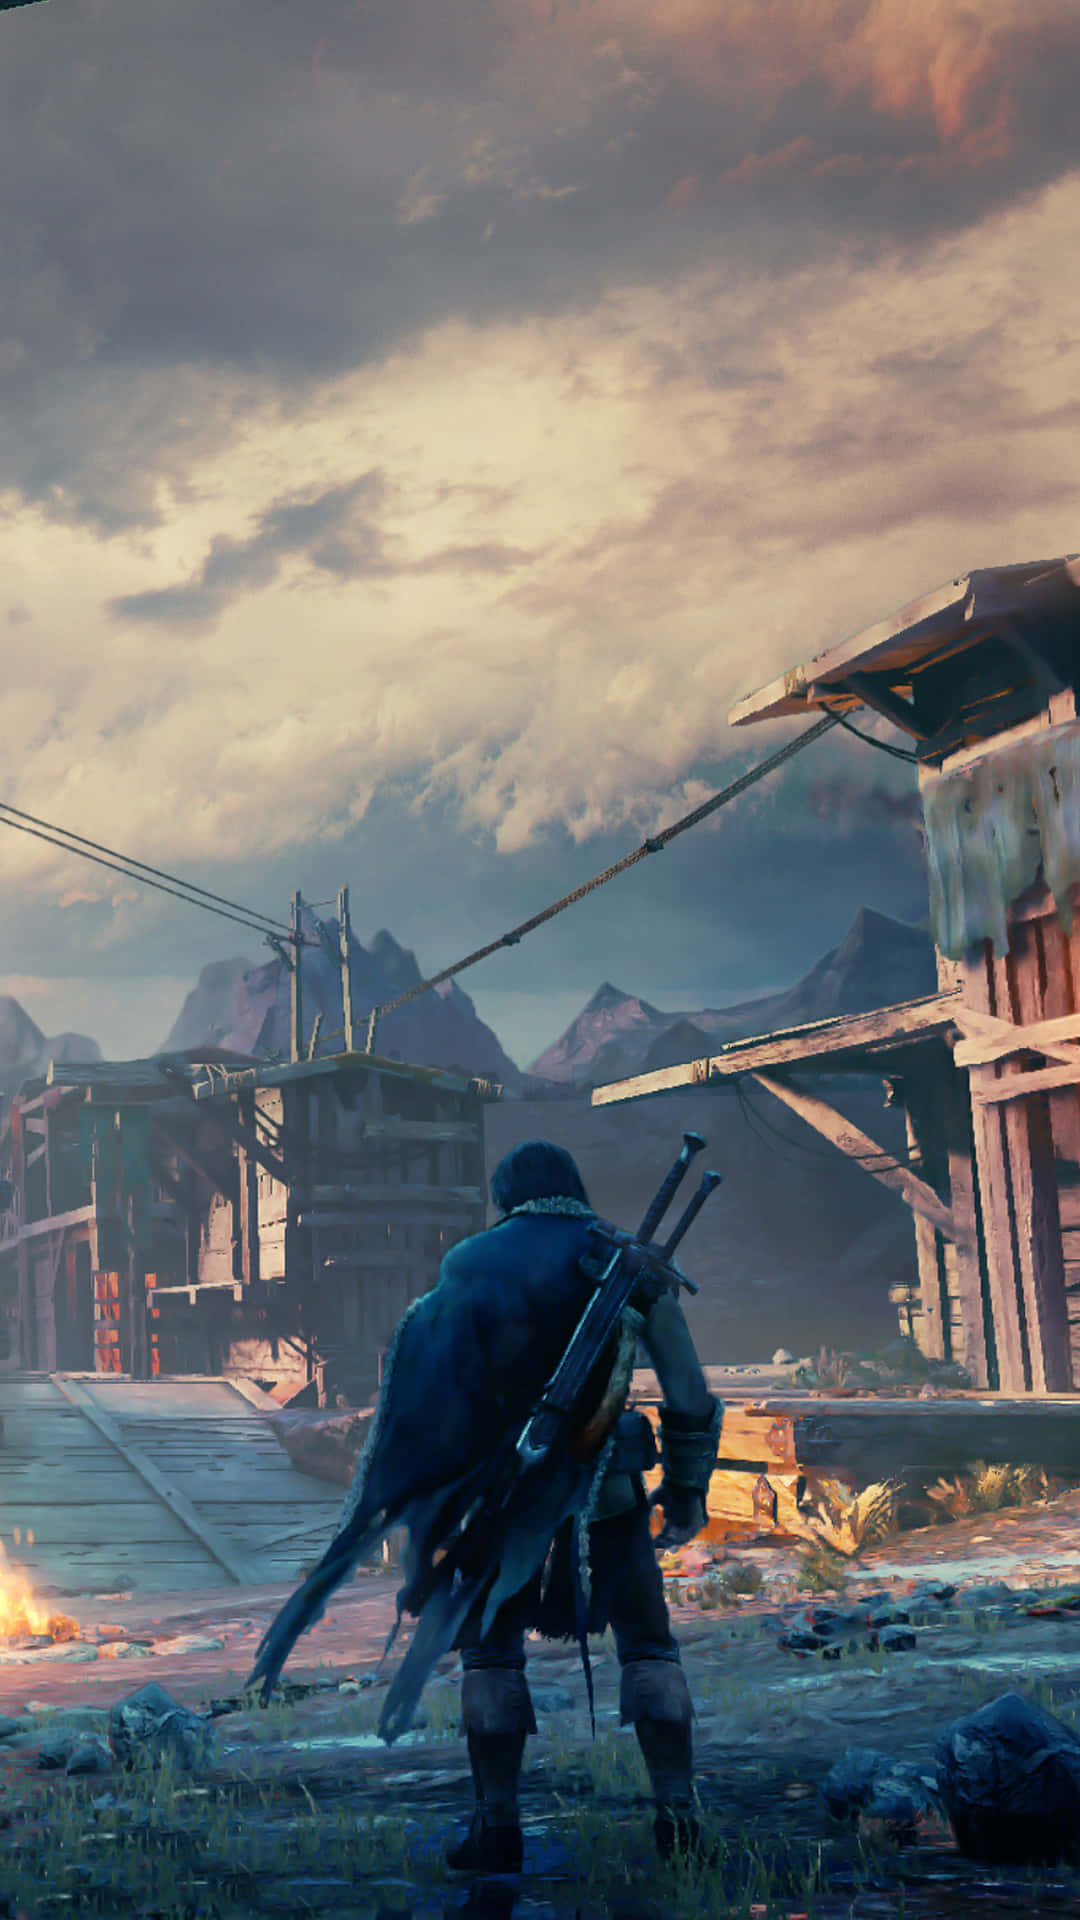 Immerse yourself in Middle Earth with the Shadow Of Mordor background.